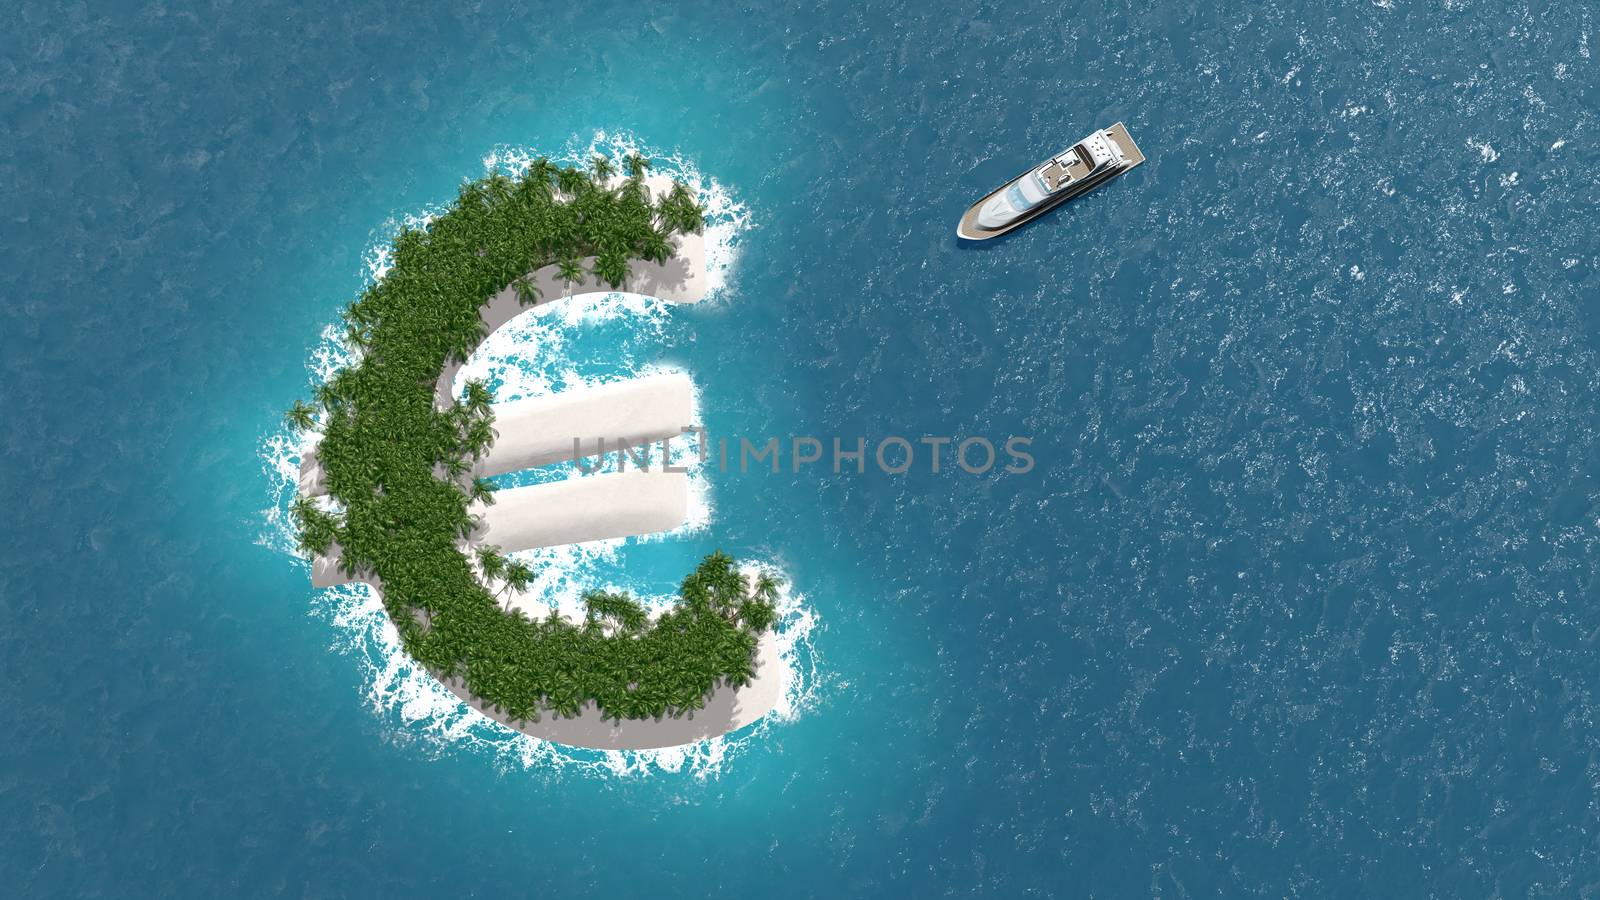 Tax haven, financial or wealth evasion on a euro shaped island. A luxury boat is sailing to the island.